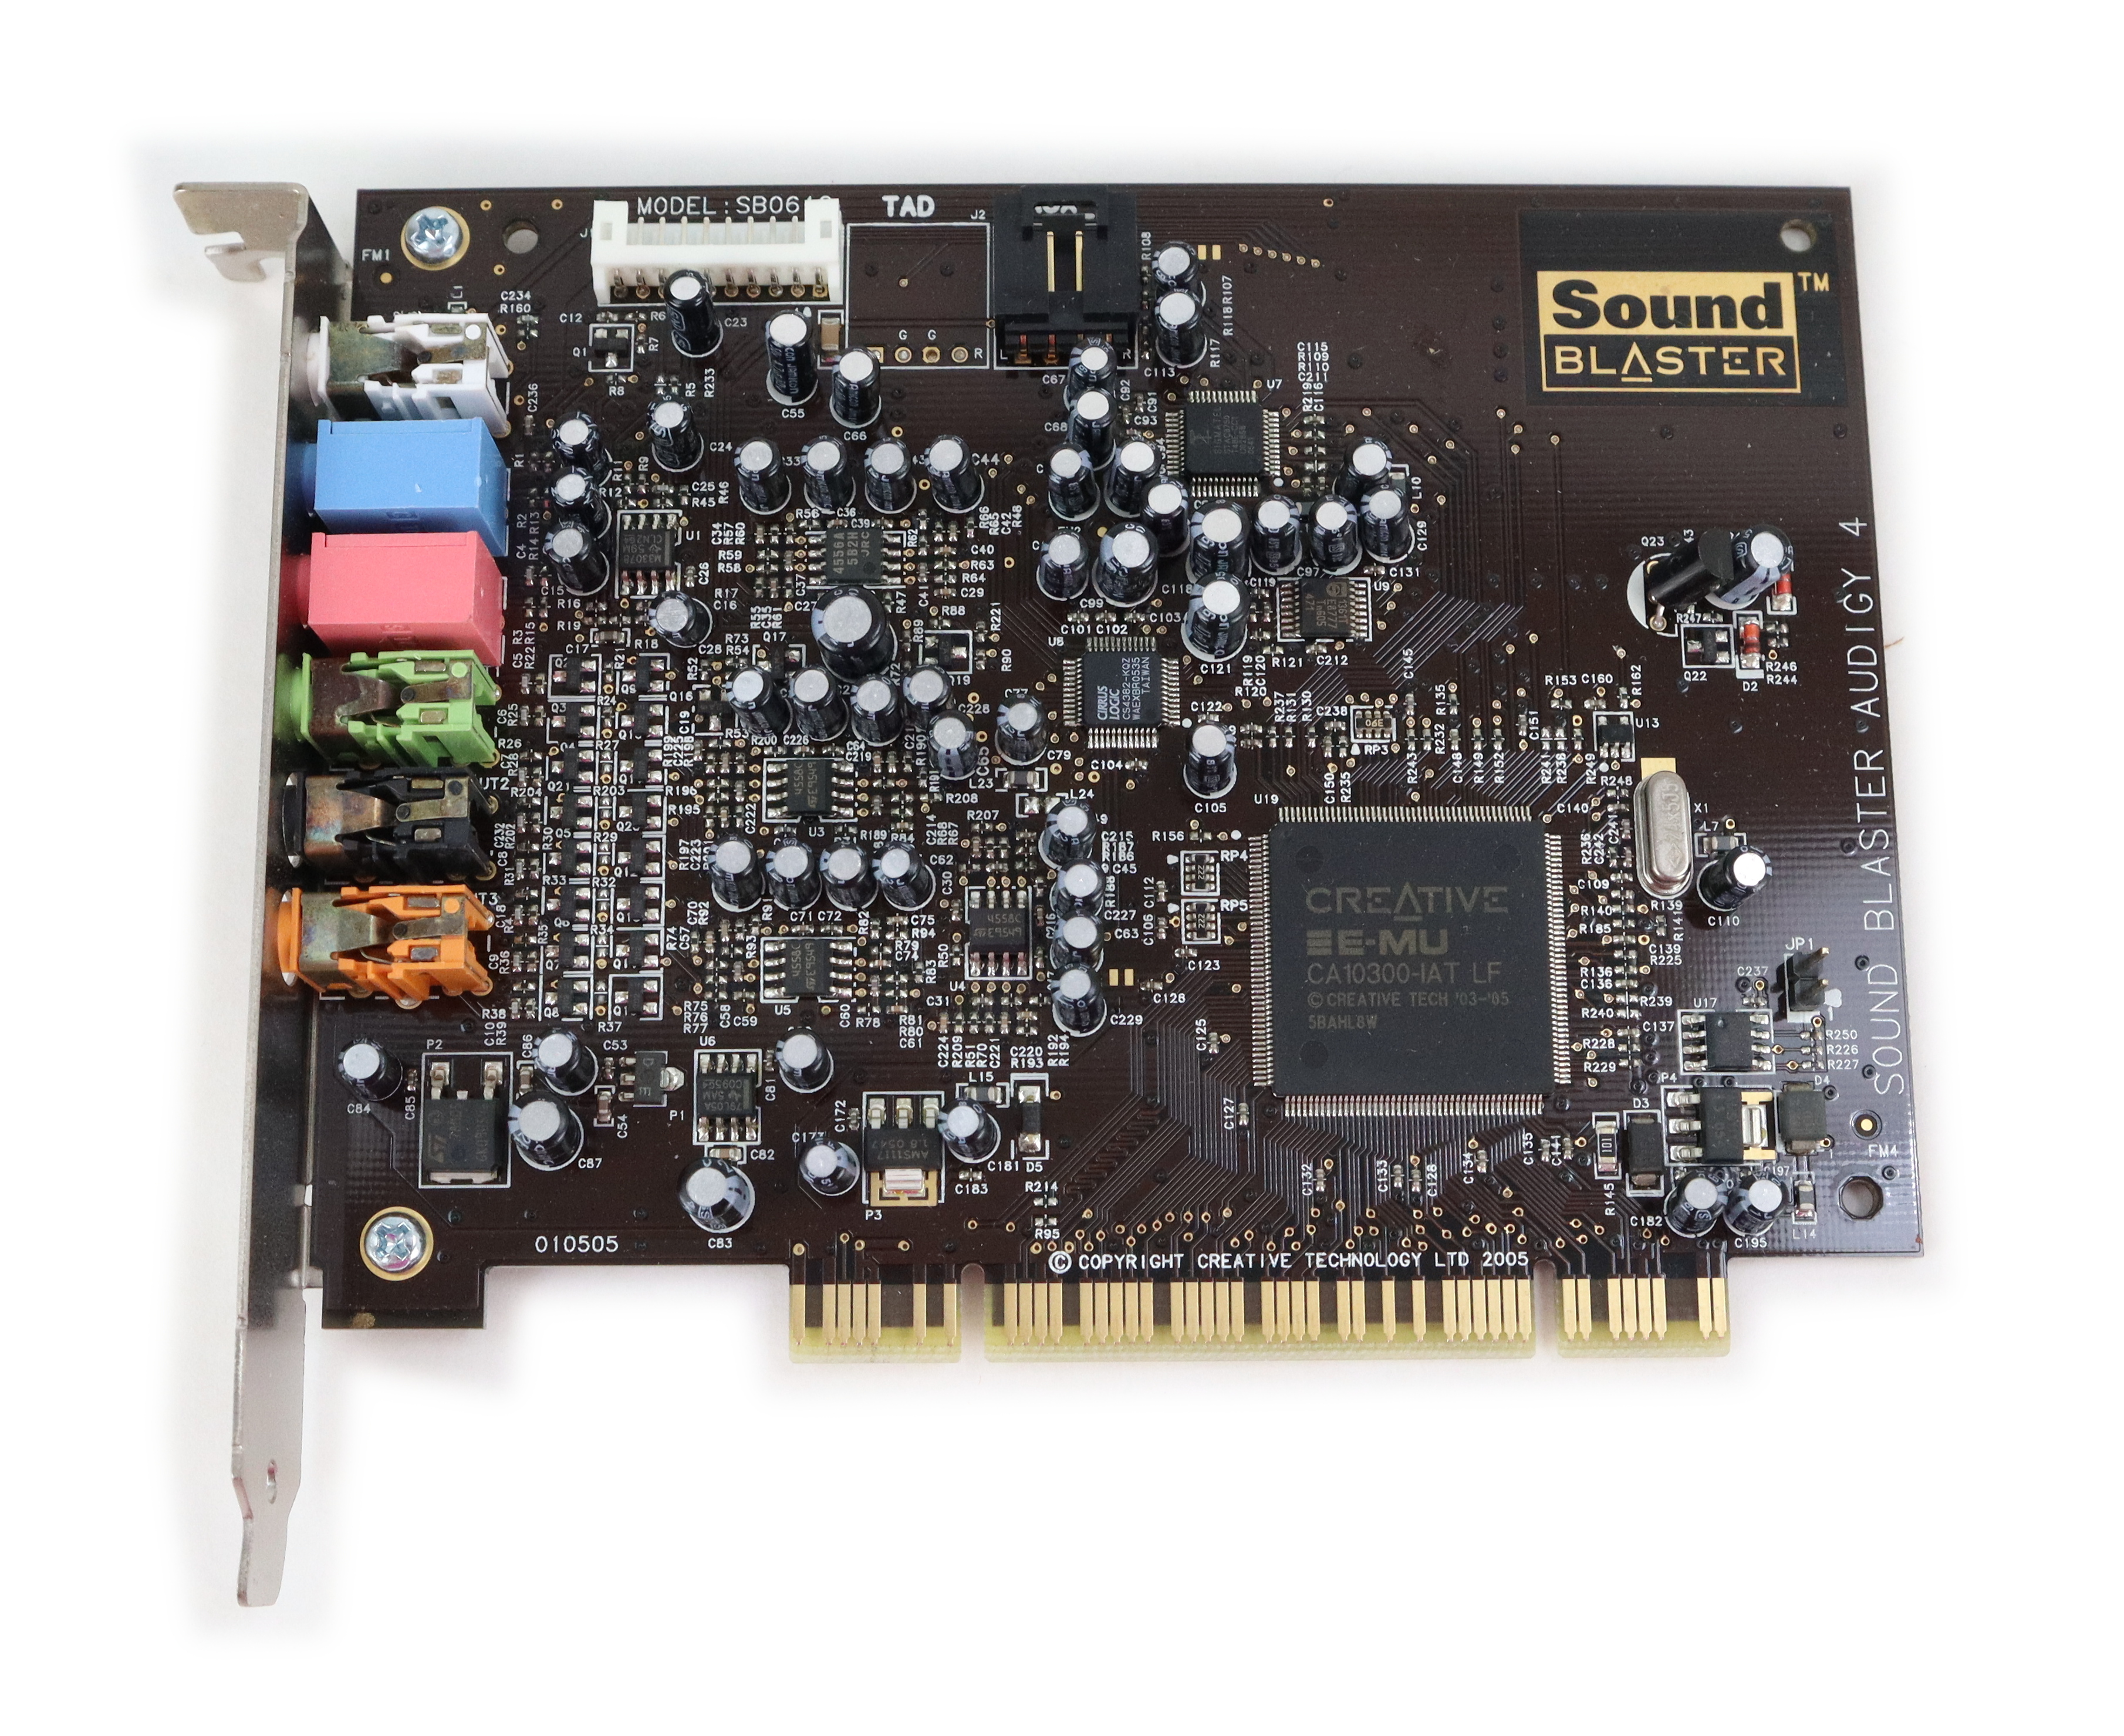 Creative Labs Sound Blaster Audigy 4 Channels 7.1 PCI Sound Card SB0610 - Click Image to Close